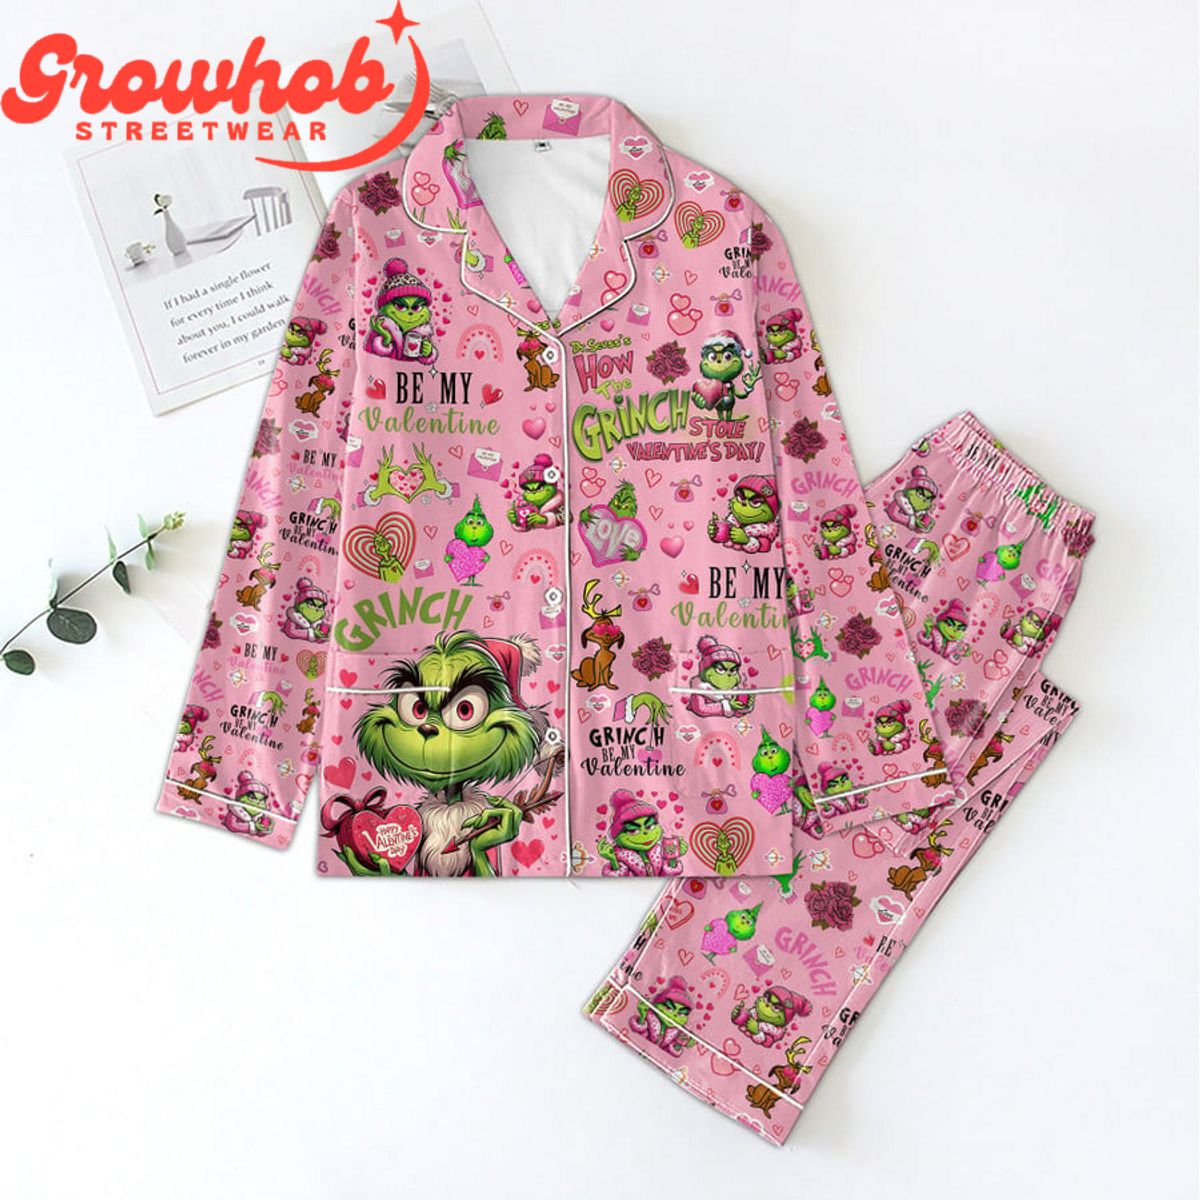 The Grinch Be My Valentine Pink Polyester Pajamas Set